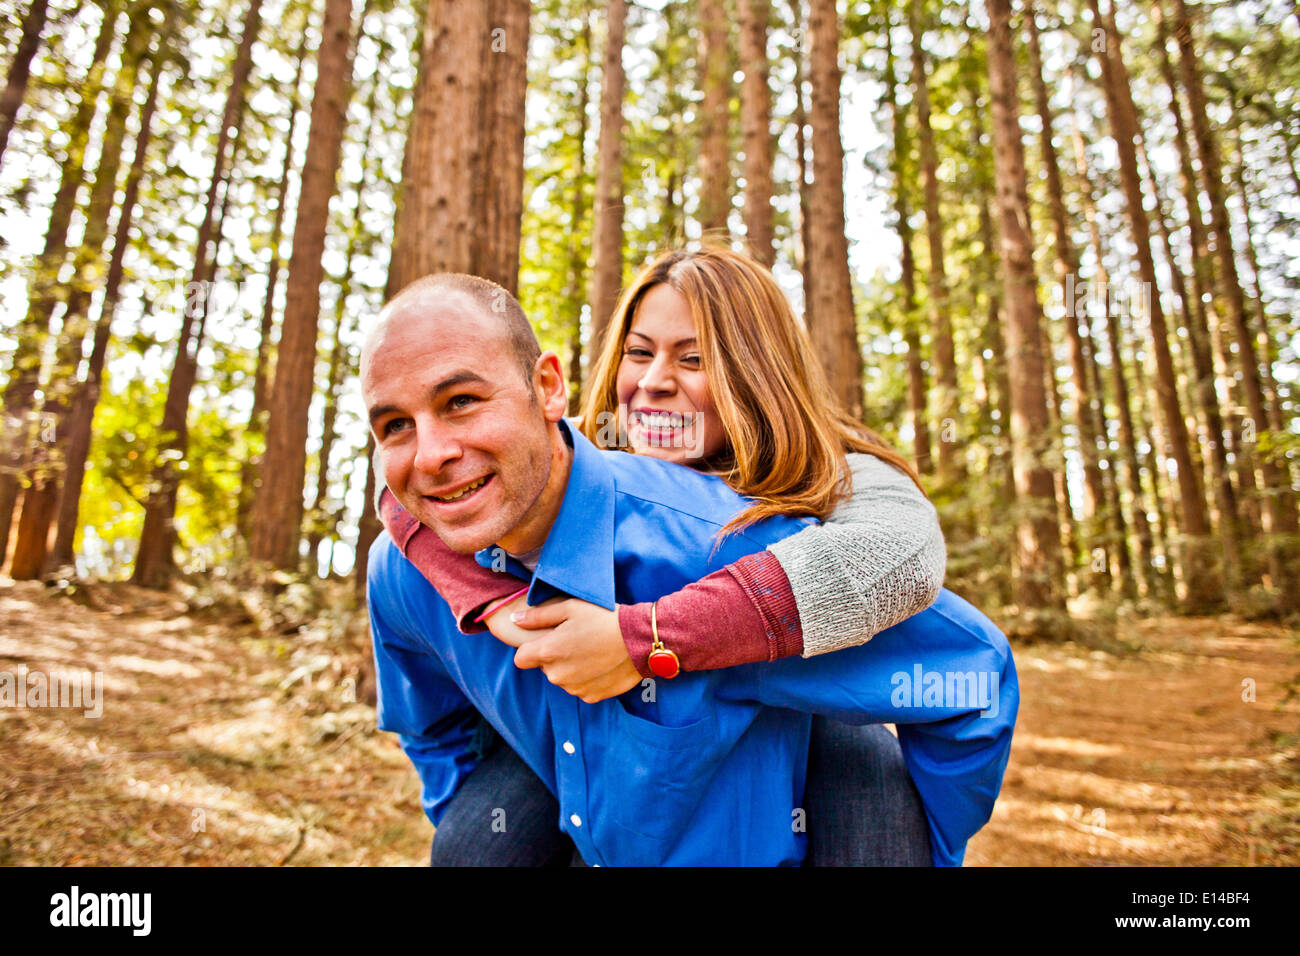 Hispanic man carrying girlfriend piggy back in forest Banque D'Images